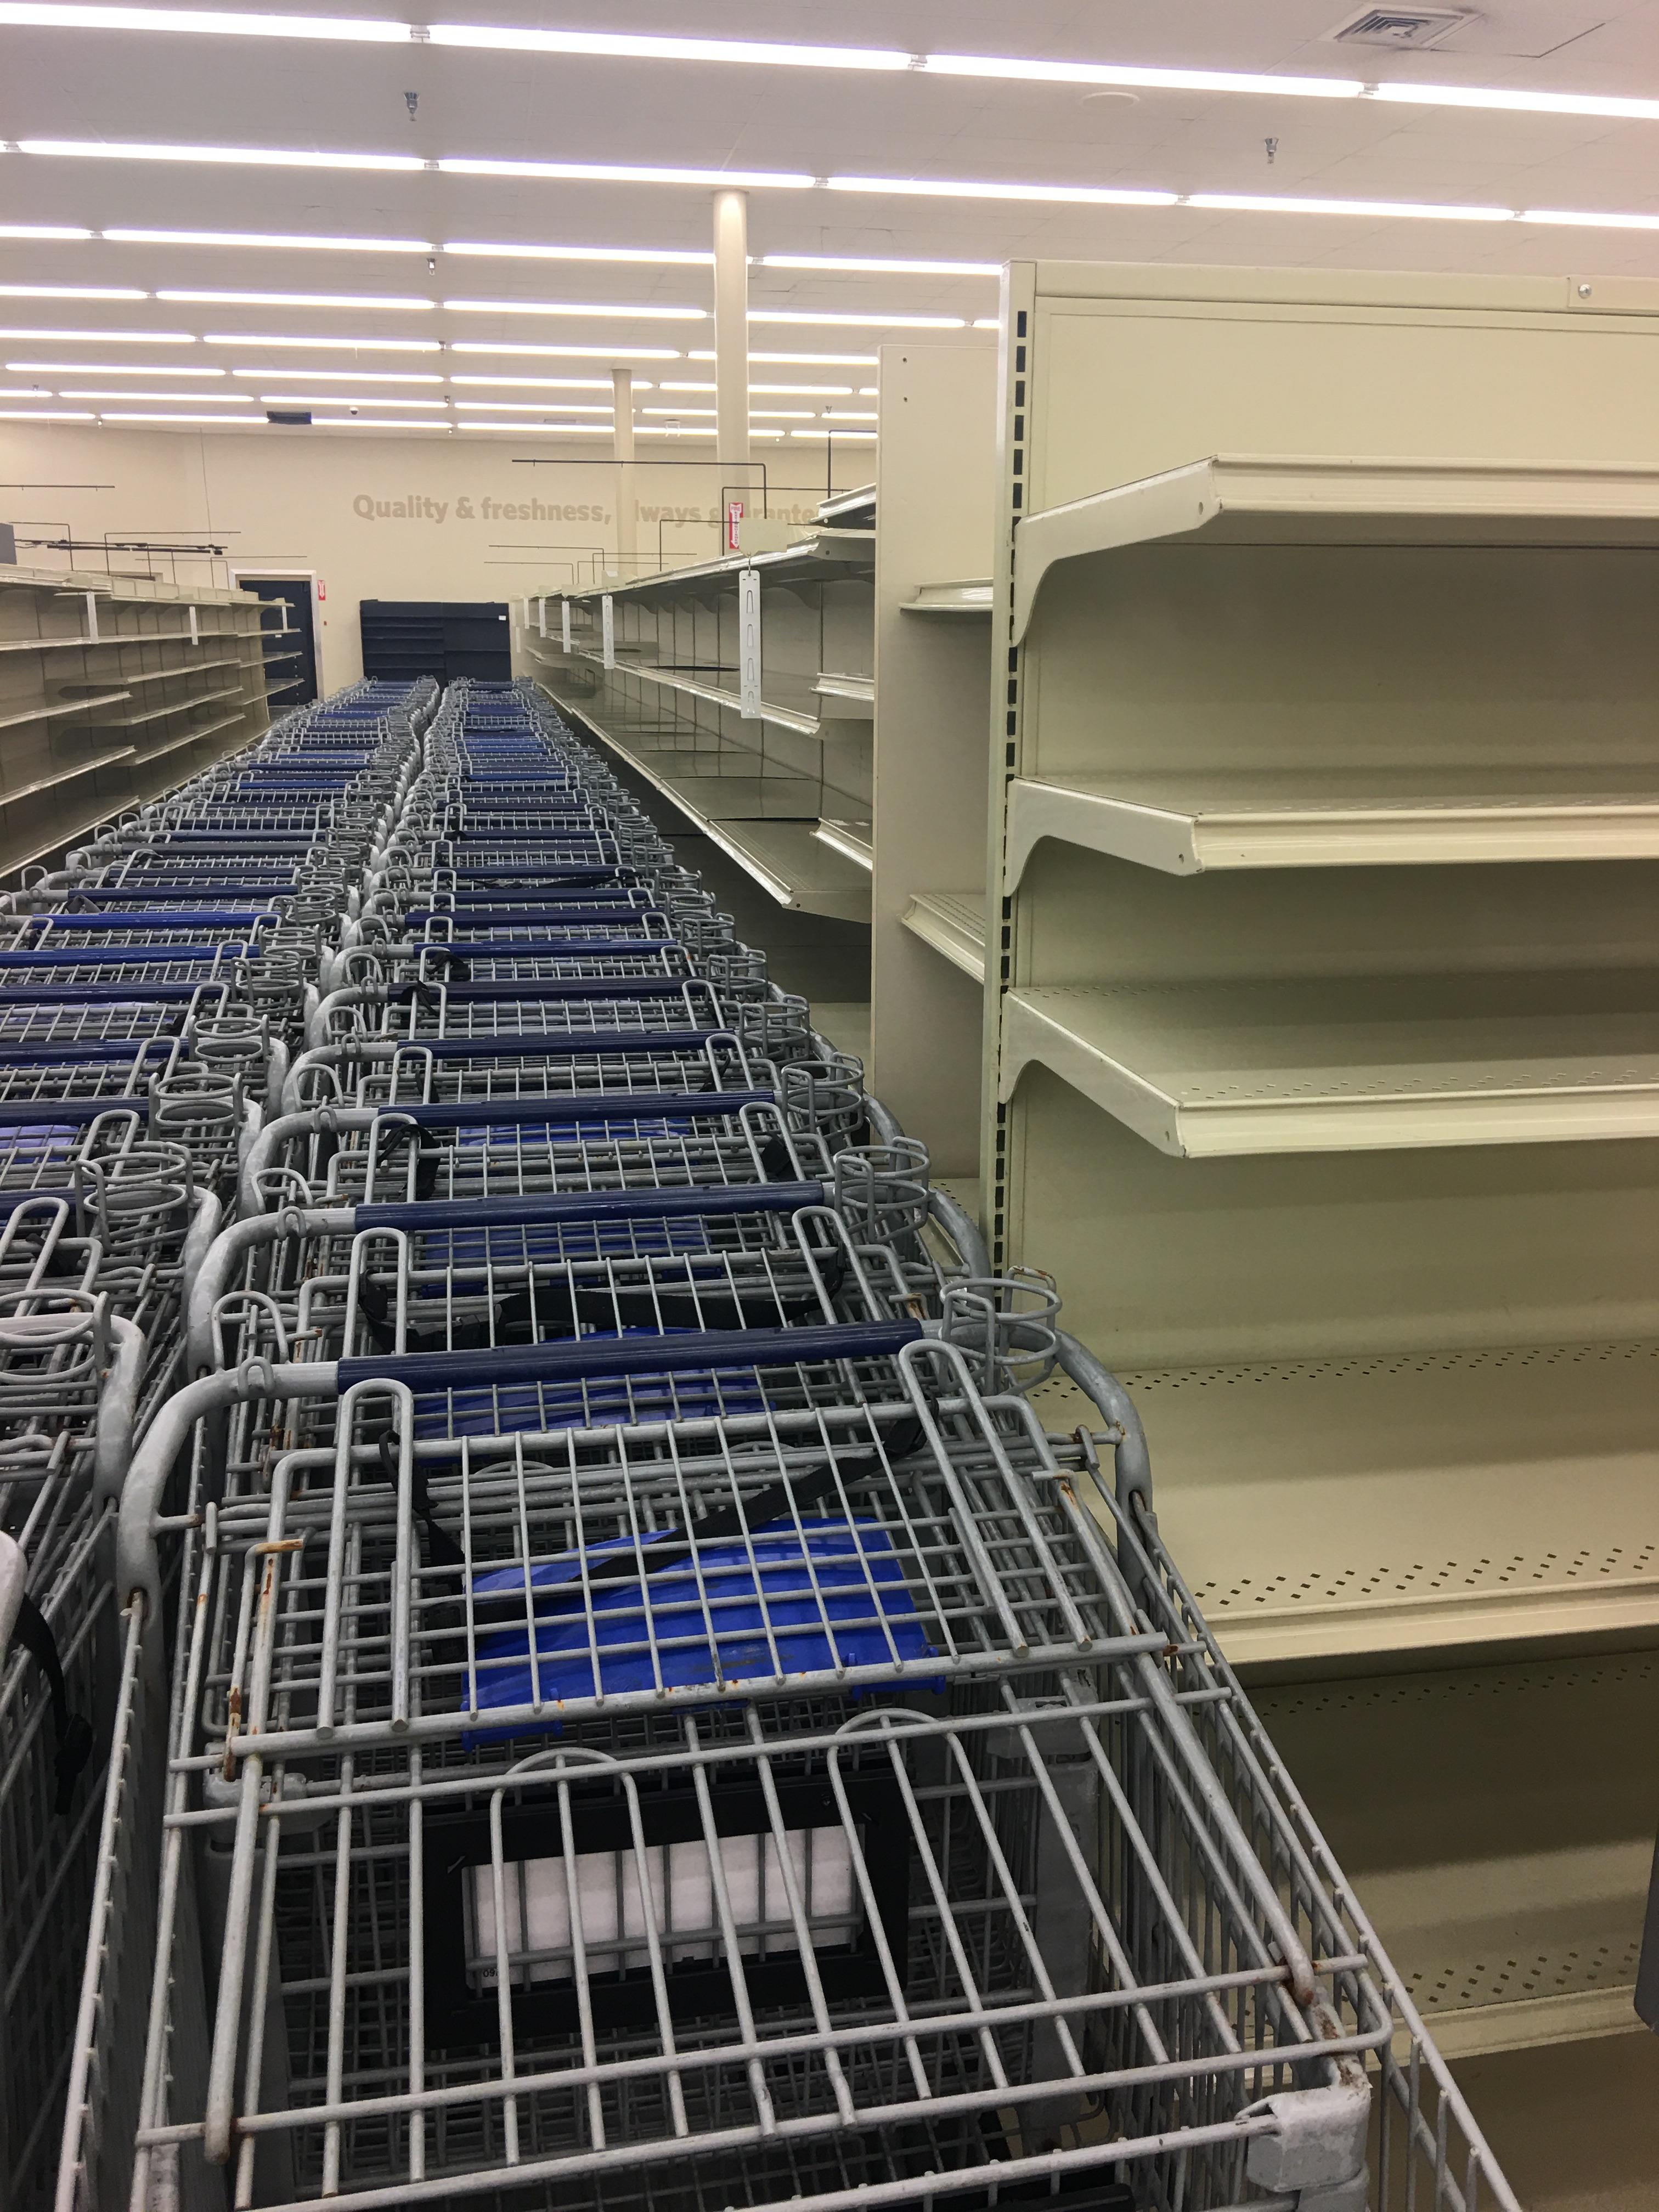 65' Kent gondola shelving, sold by the foot measured down the middle